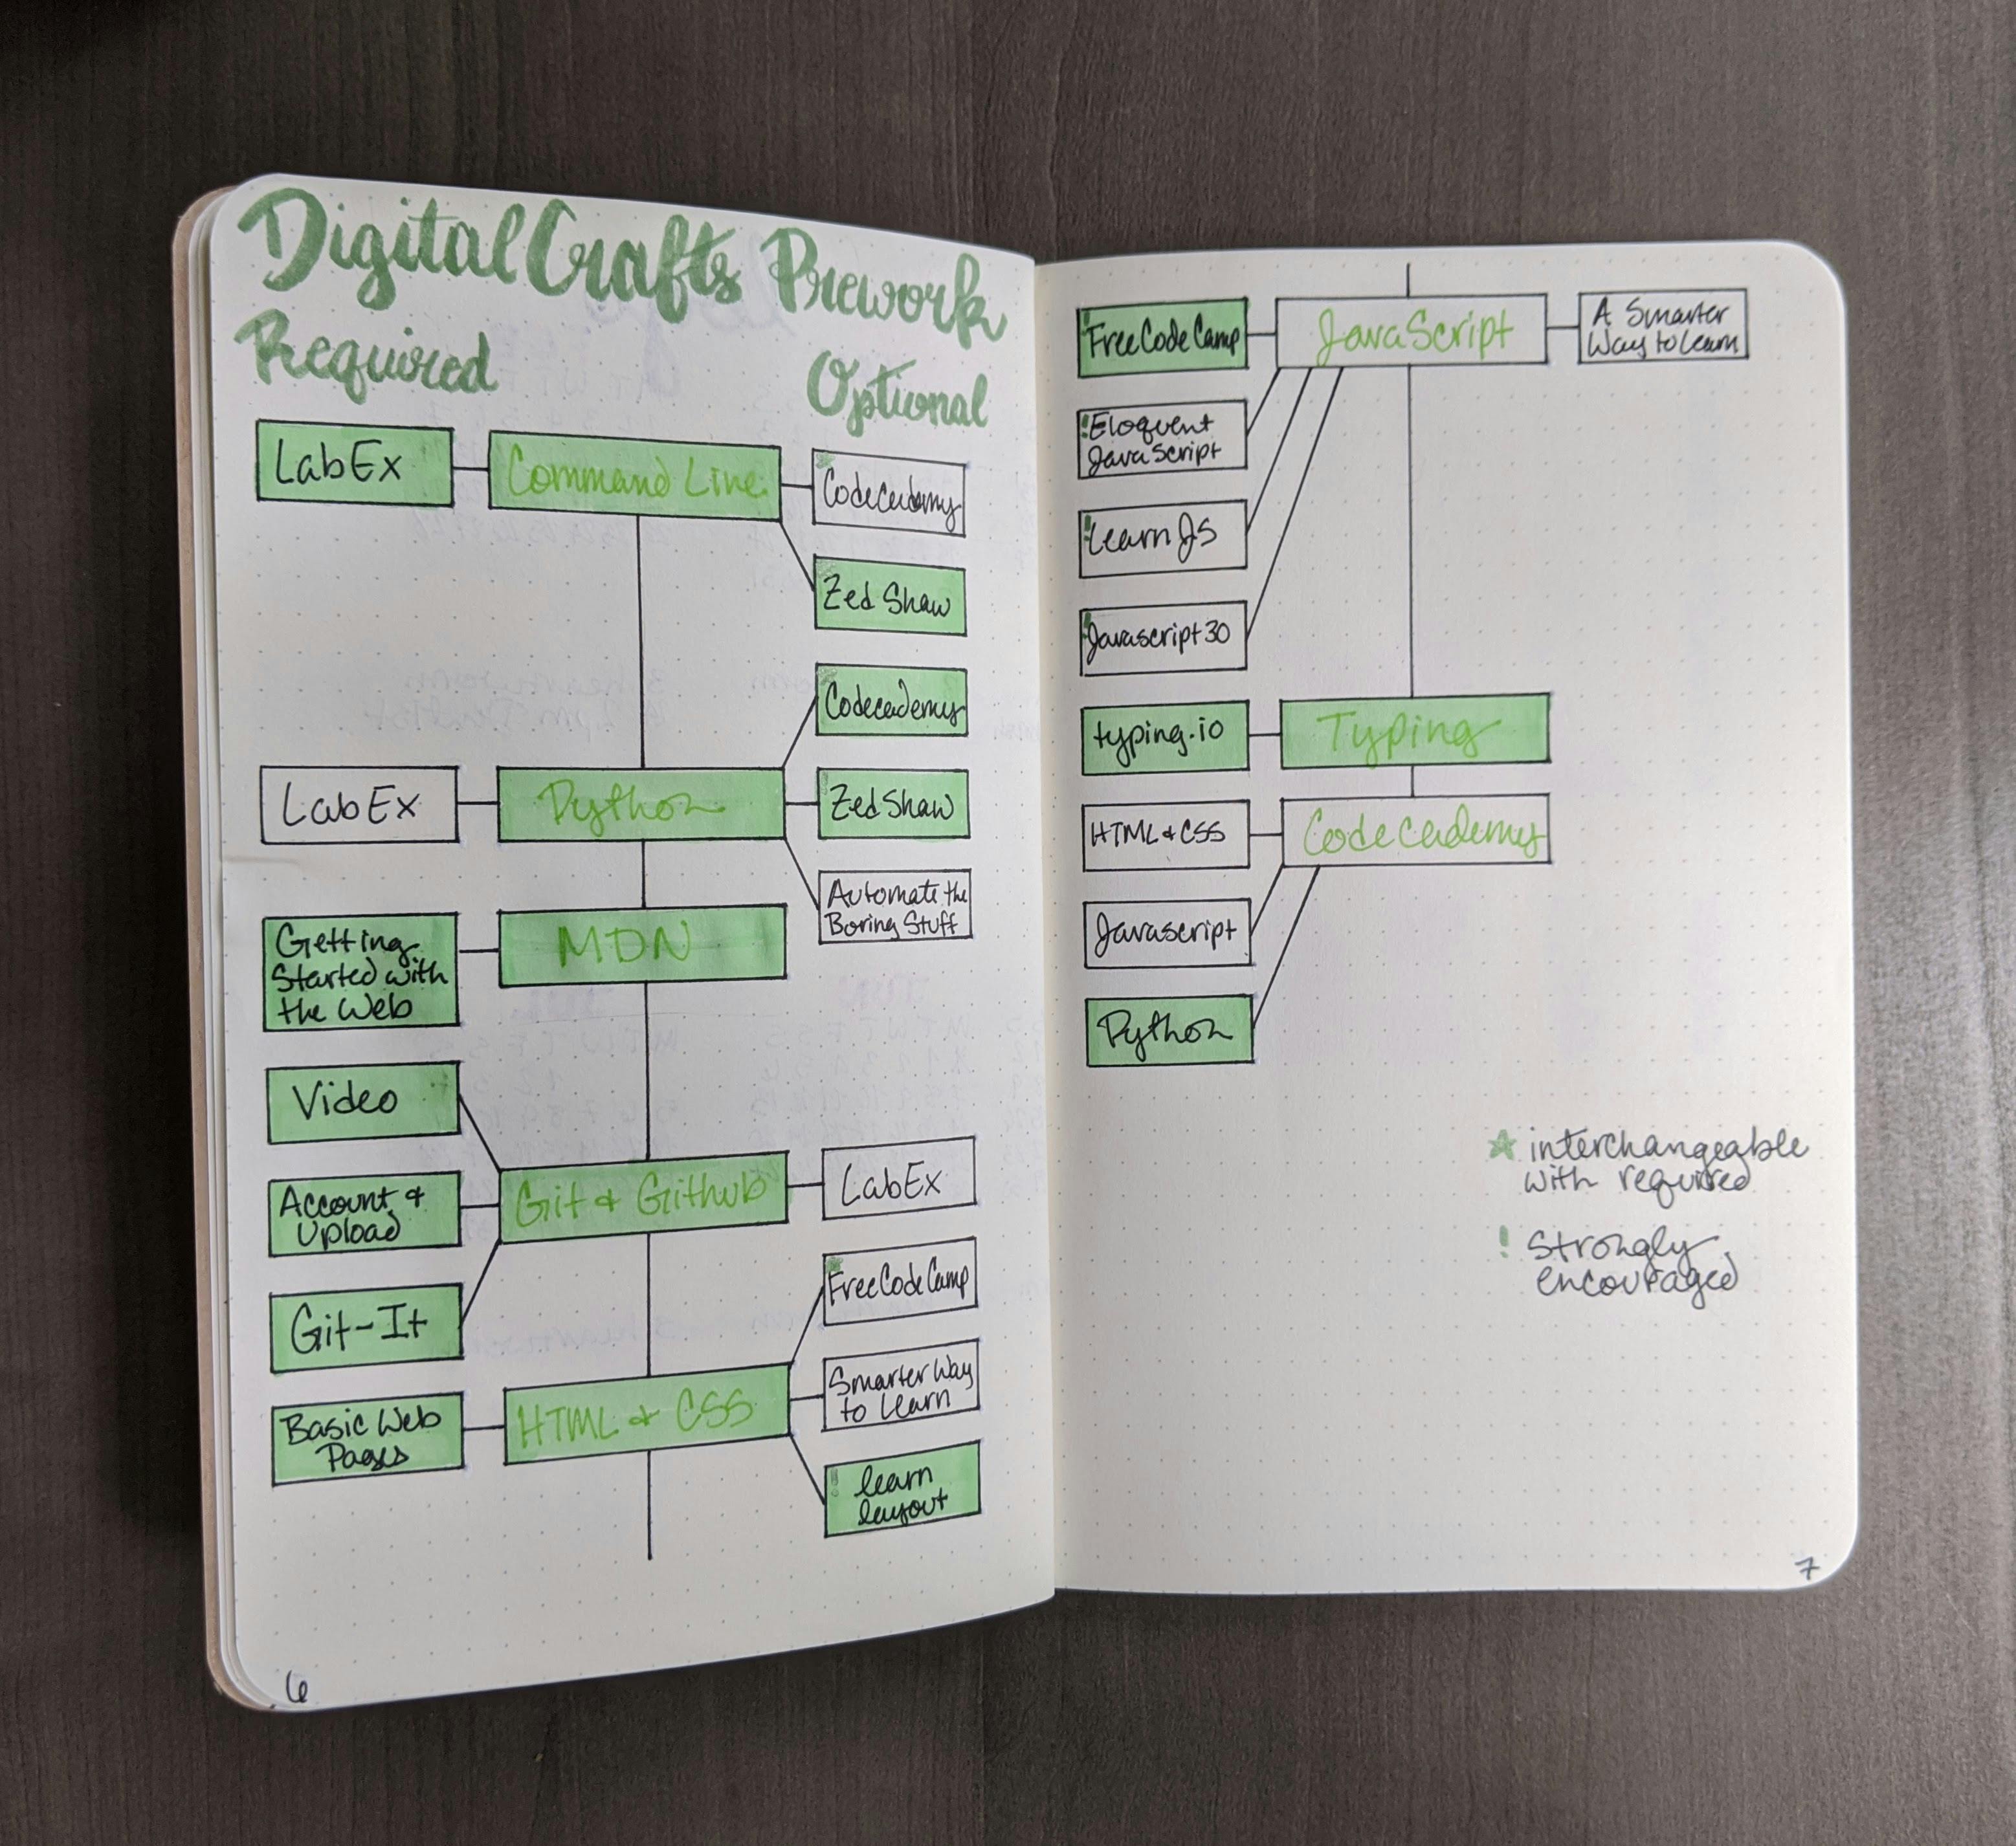 DigitalCrafts Prework a flow chart with 3 columns - Required, Optional, and general categories like Command Line and JavaScript. The Required and Optional columns have learning resources like LabEx and Git-It. Boxes are colored in green as they are completed